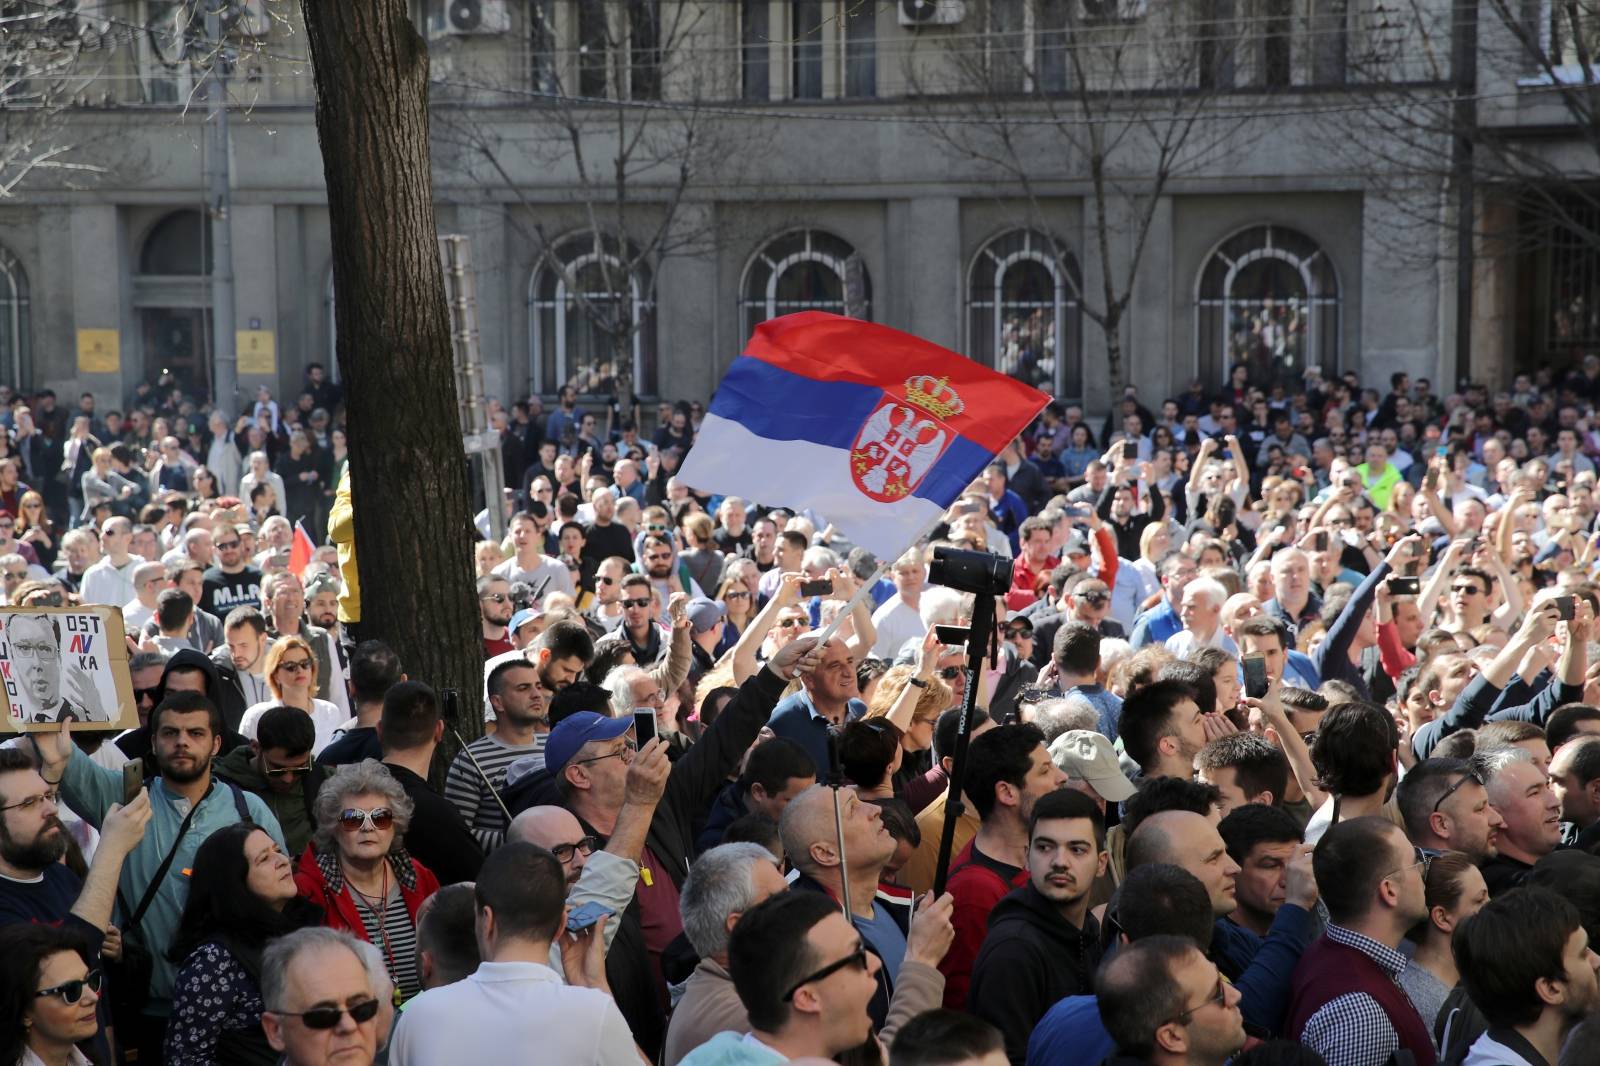 Demonstrators attend a protest against Serbian President Vucic and his government in front of the presidential building in Belgrade